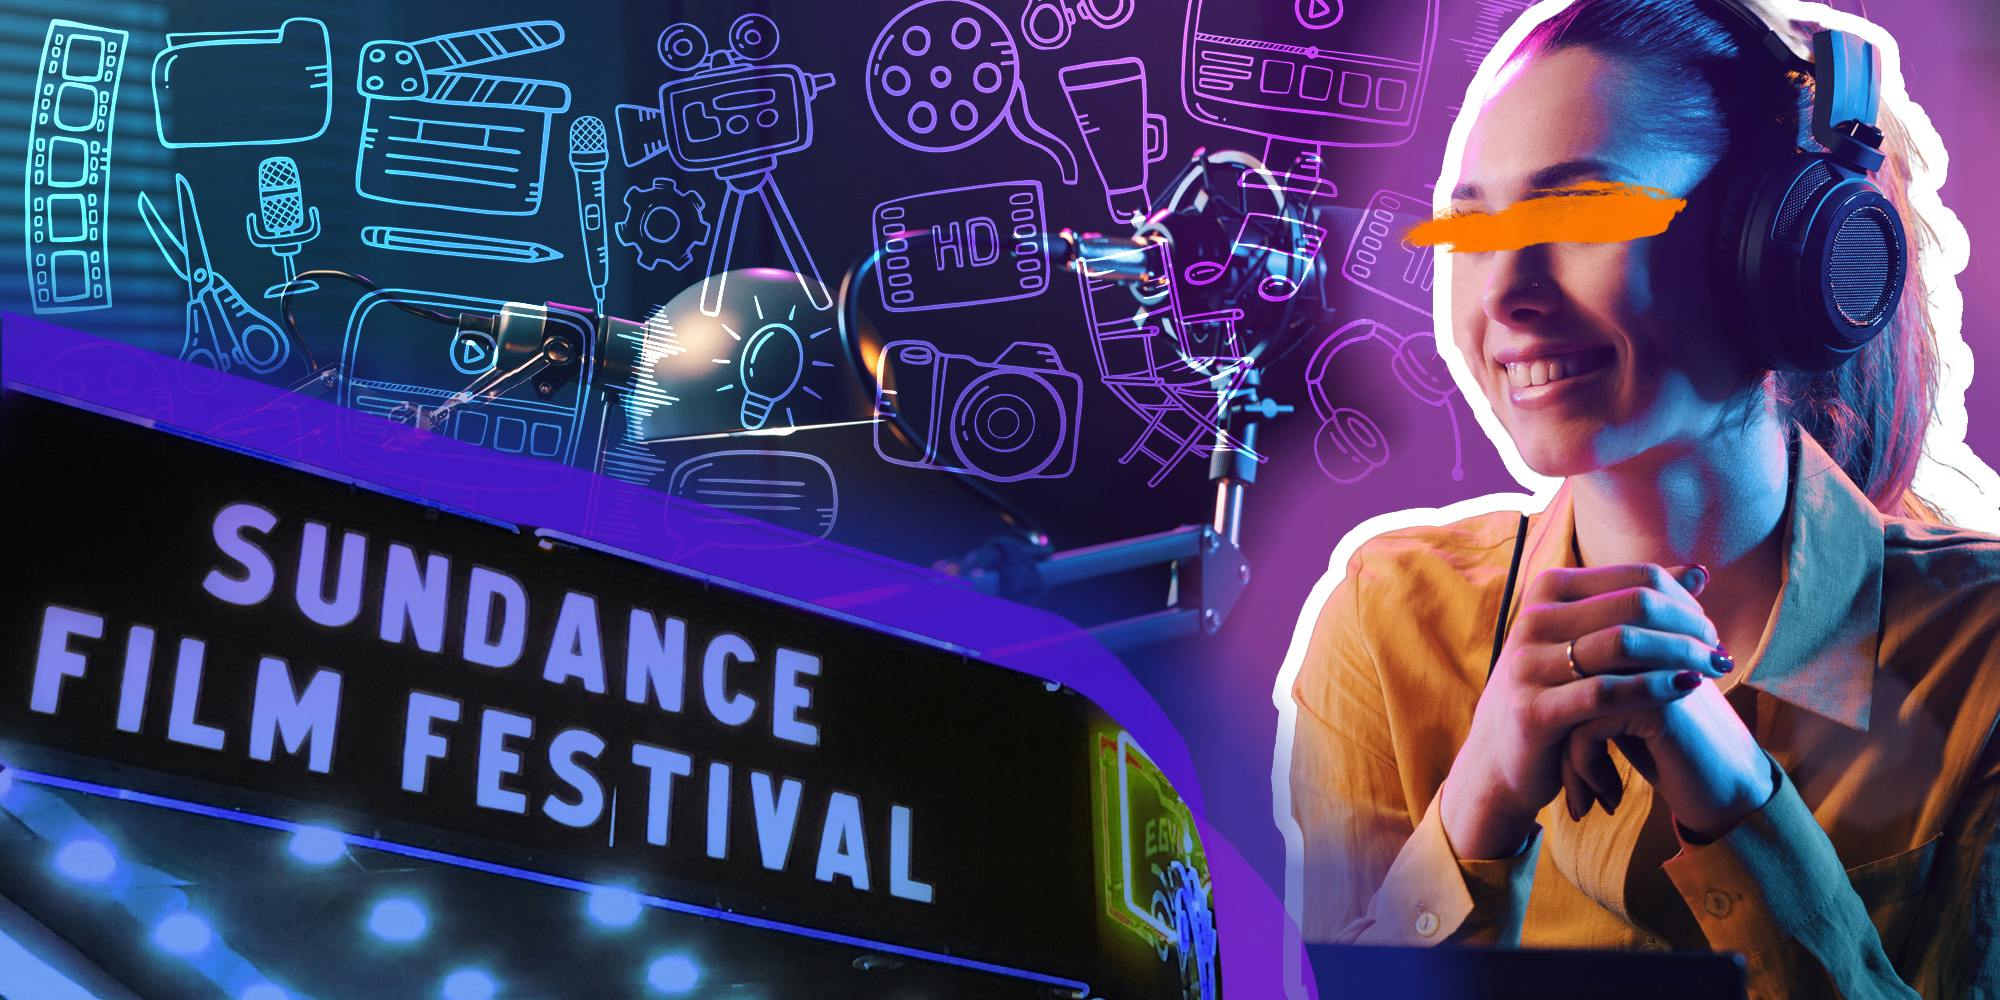 Sundance film festival sign over influencer with headphones and graphic design background